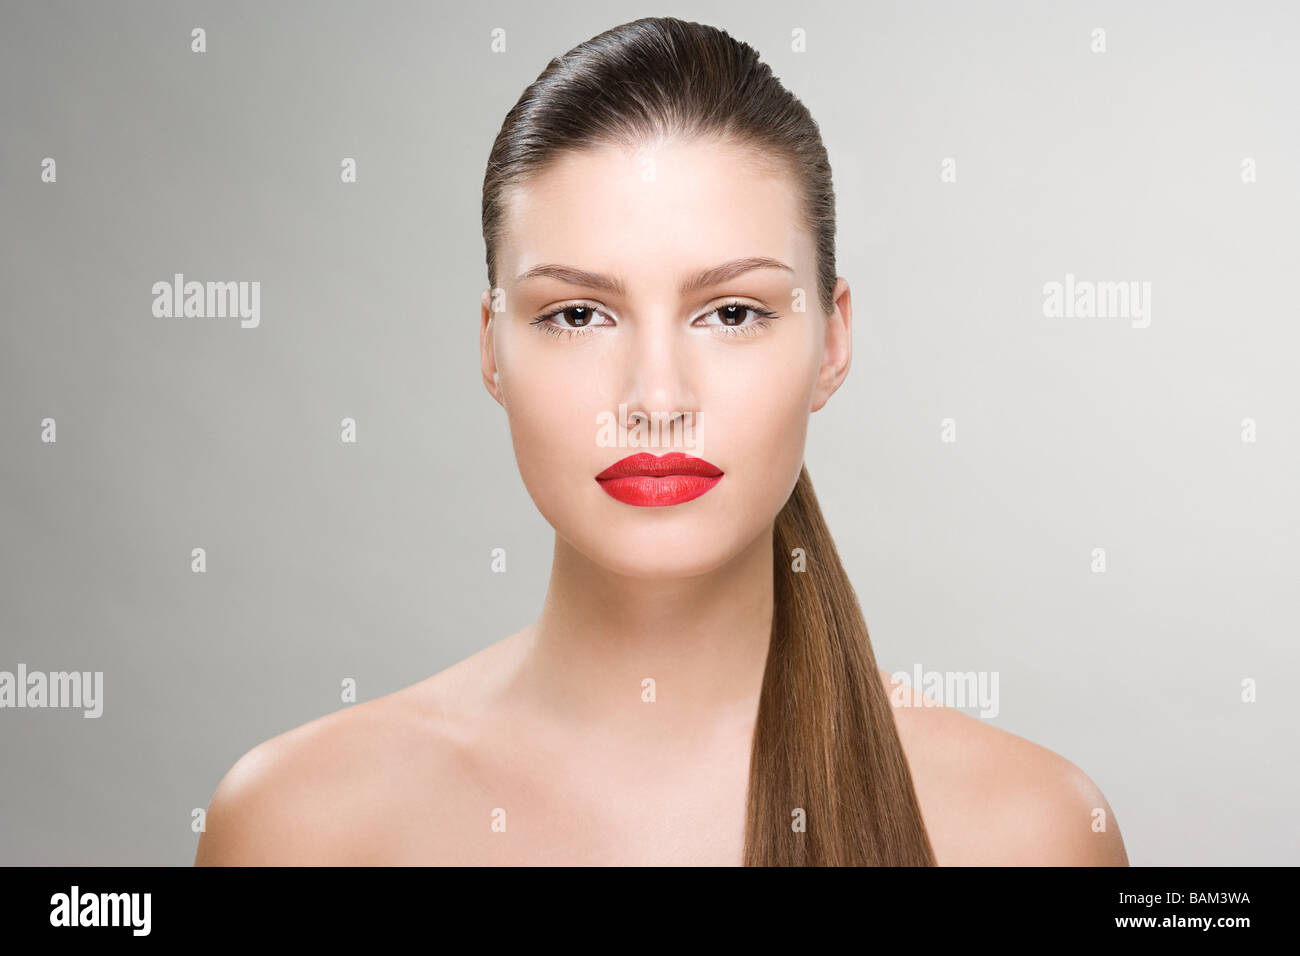 Portrait of a young woman wearing lipstick Stock Photo